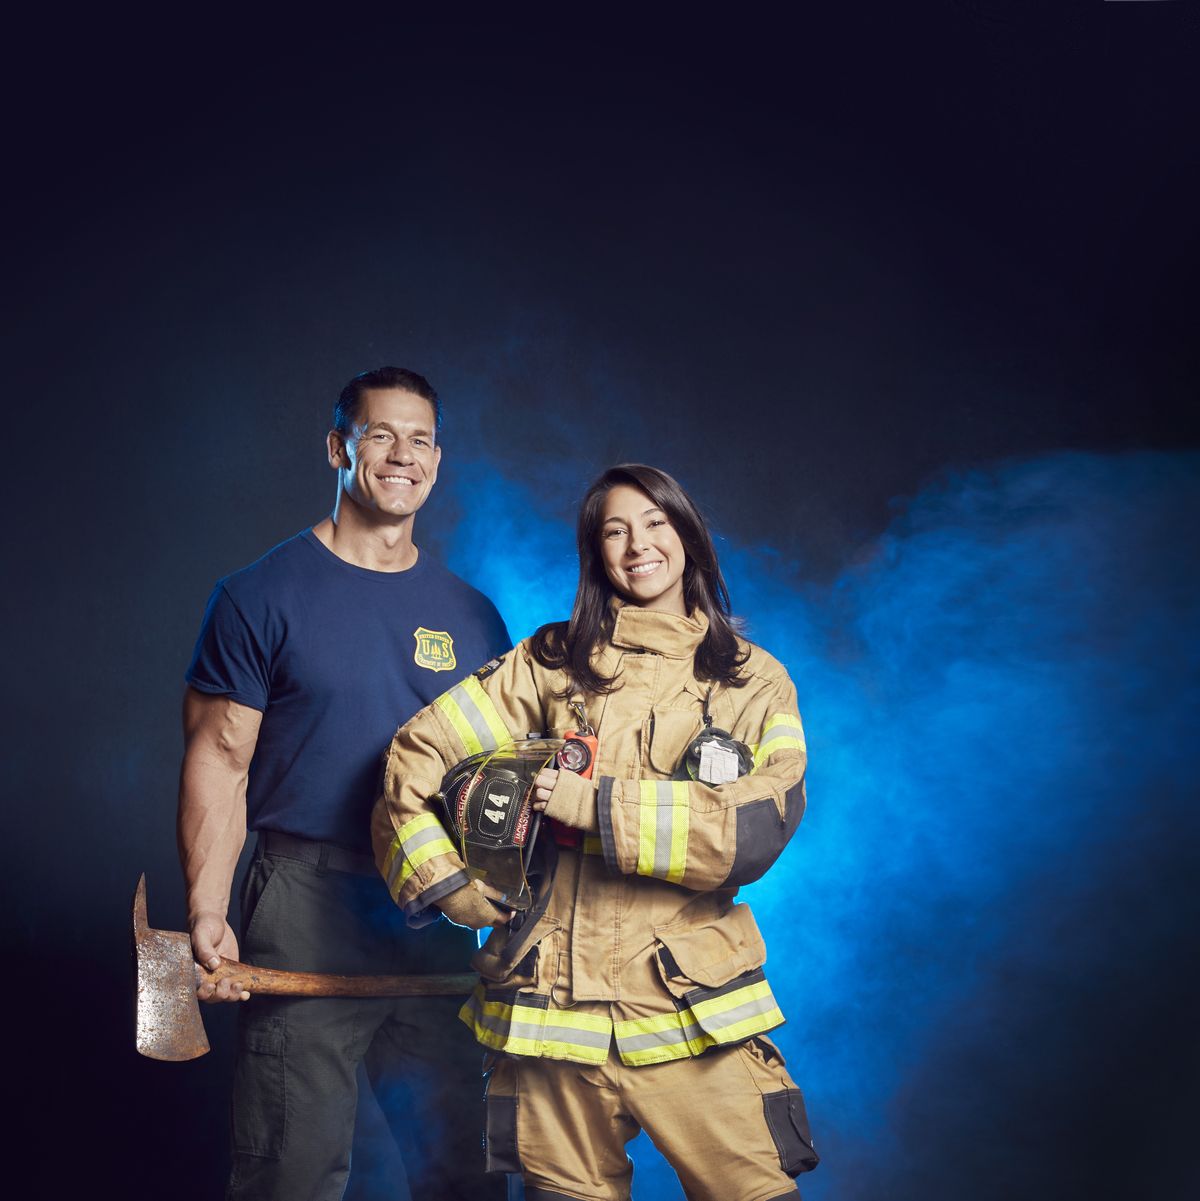 See John Cena as a Firefighter in New Comedy 'Playing with Fire